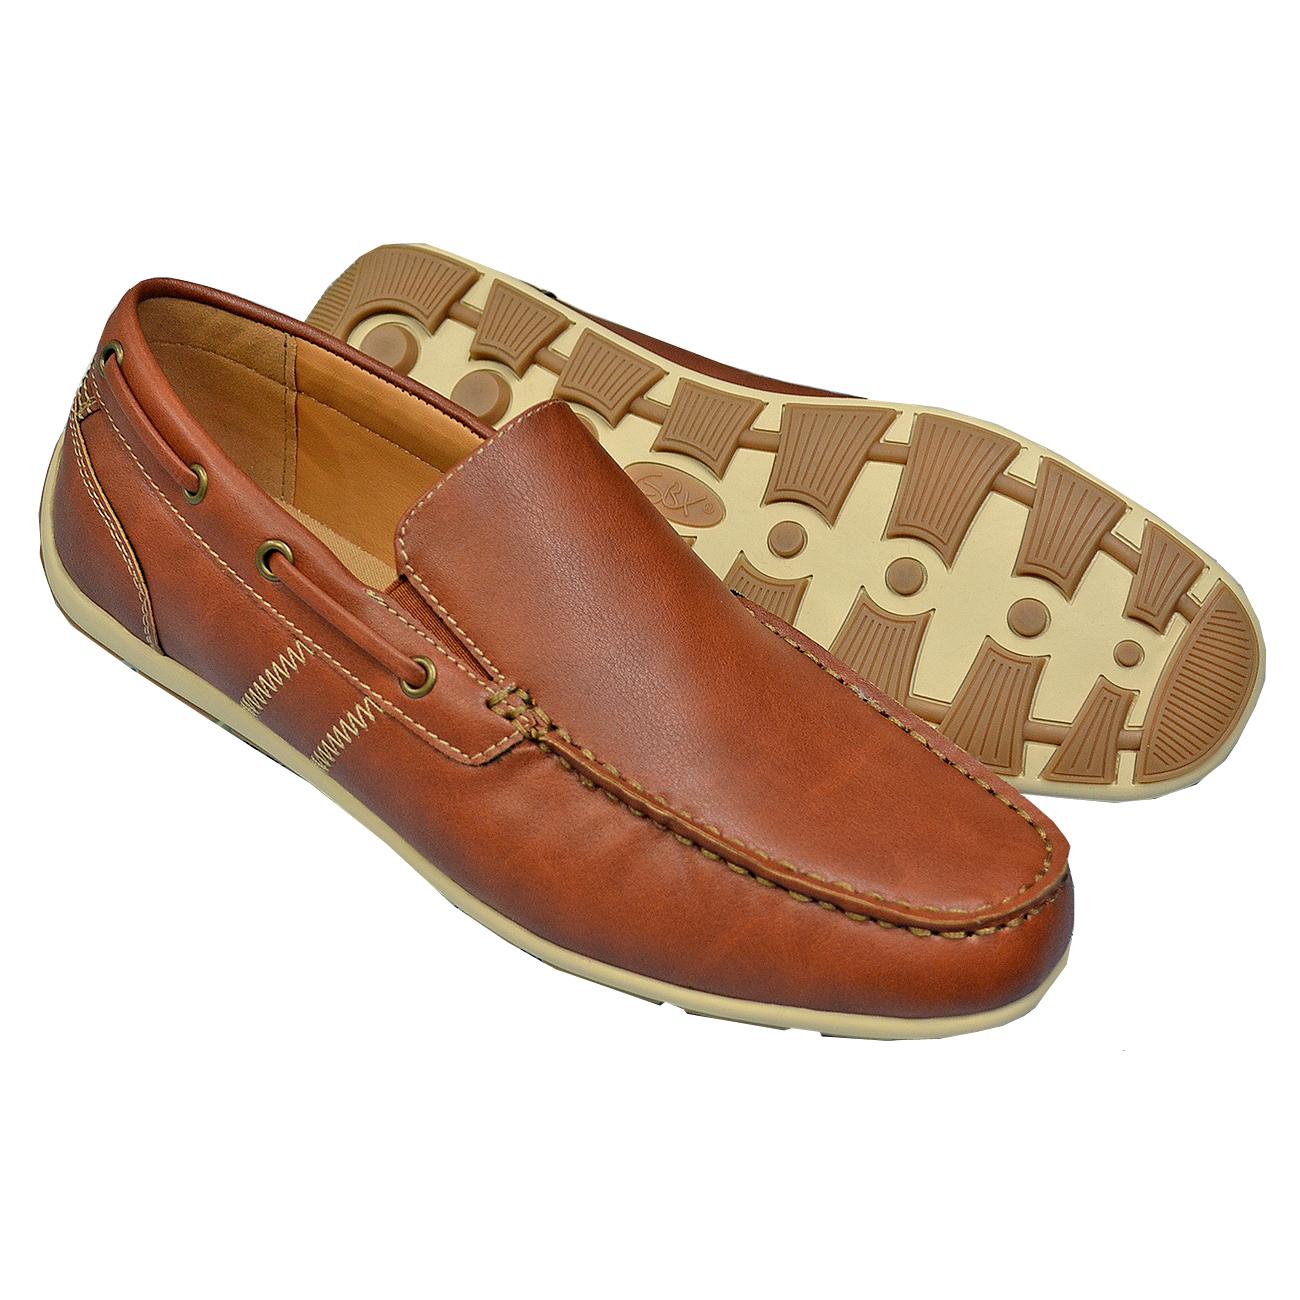 GBX Mens Ludlam Driving Style Loafer